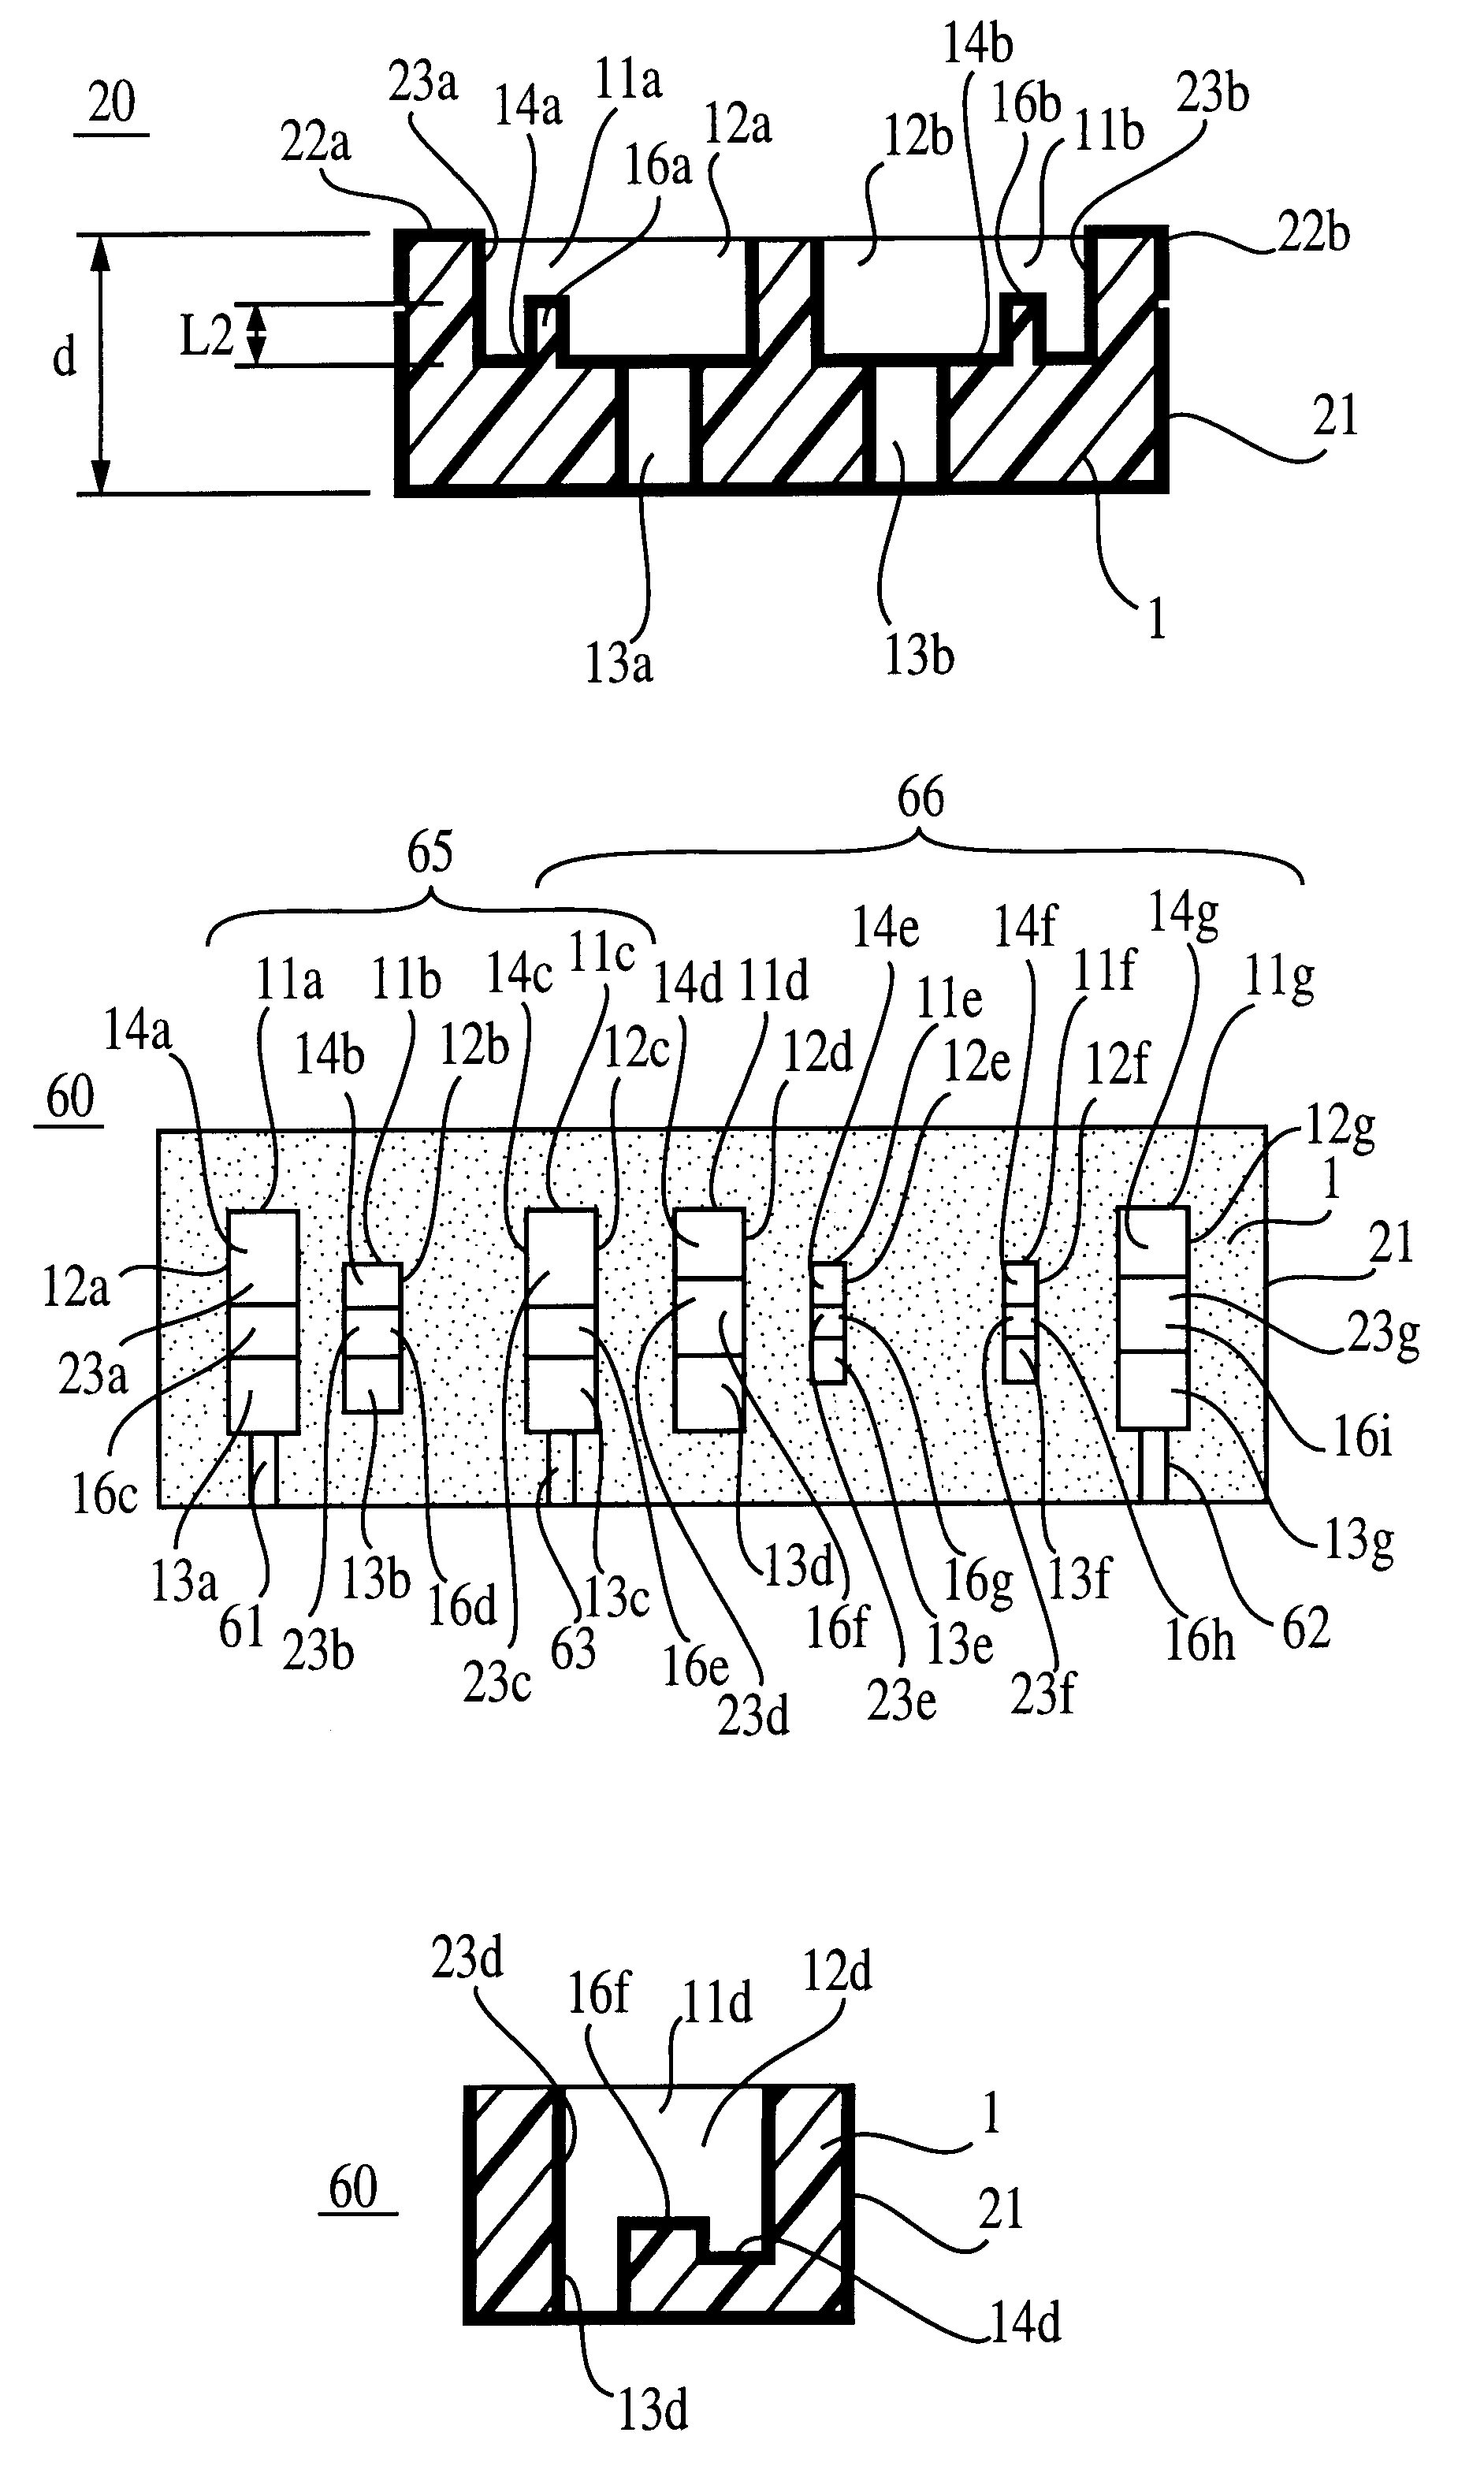 Dielectric filter having at least one stepped resonator hole with a recessed or protruding portion, the stepped resonator hole extending from a mounting surface